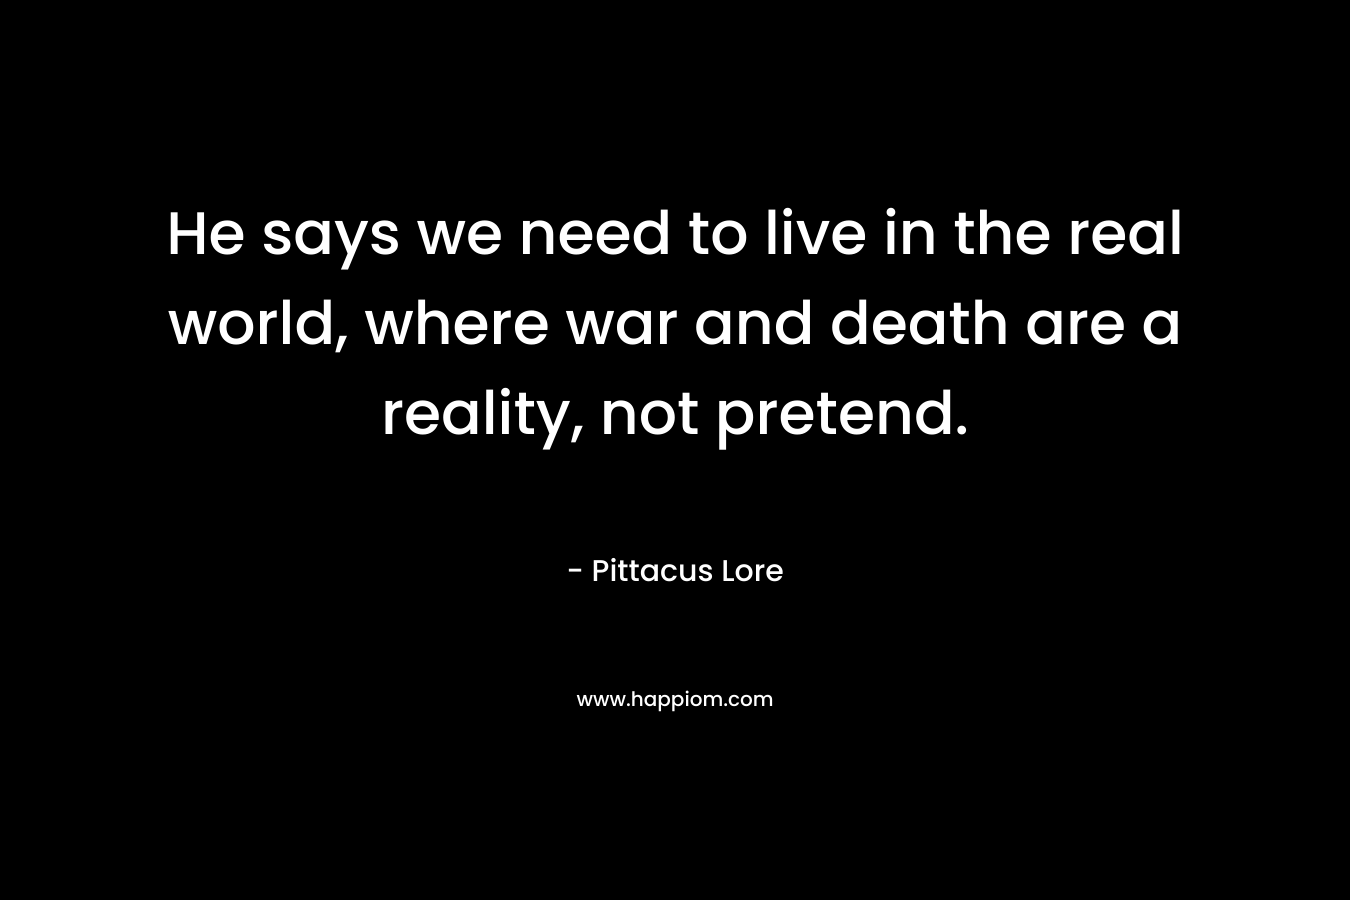 He says we need to live in the real world, where war and death are a reality, not pretend.